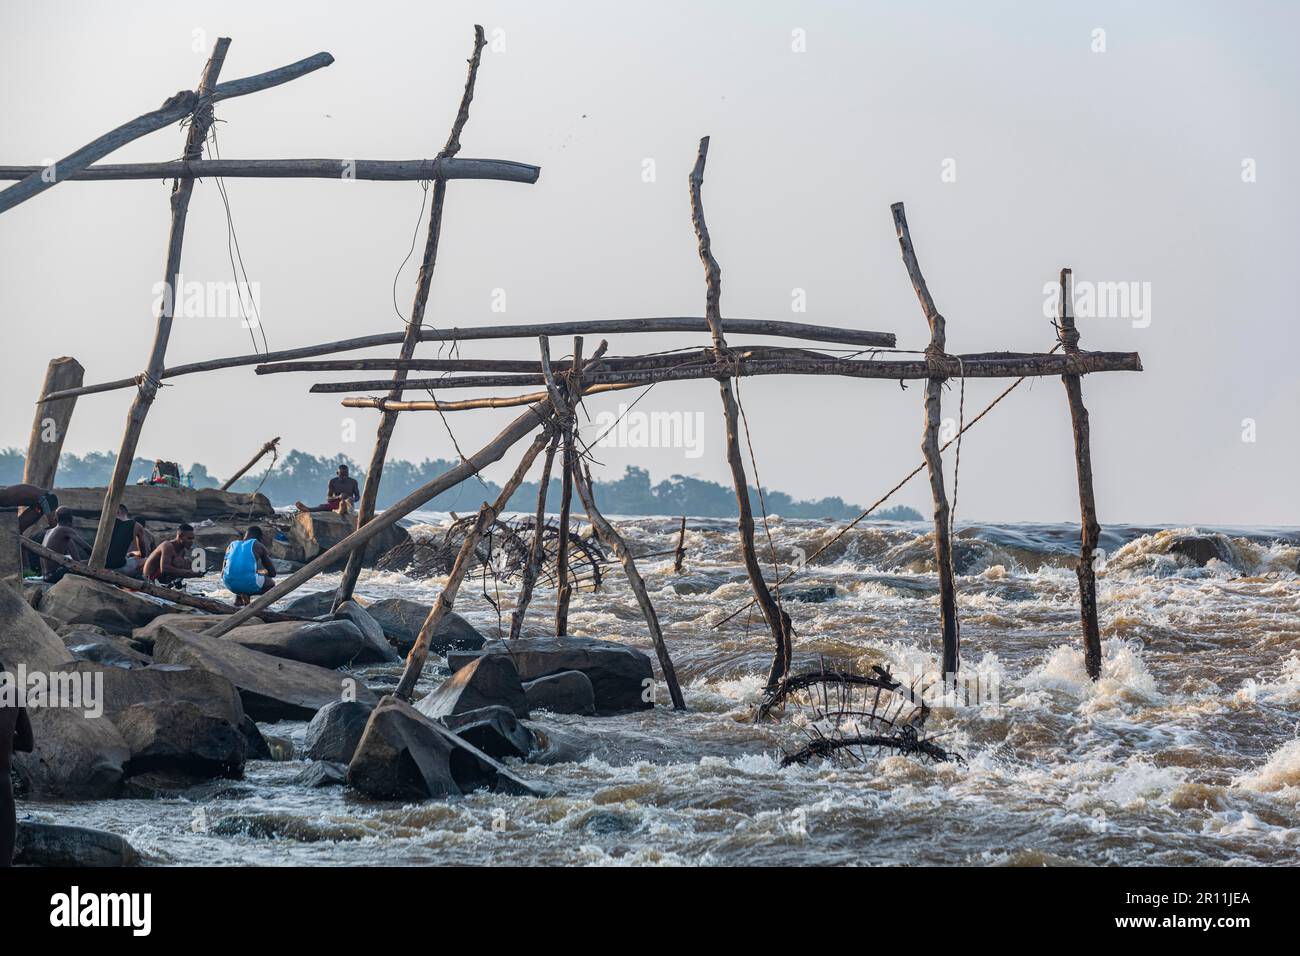 Wooden tripods with baskets attached, Wagenya tribe, Kisangani, Congo river, DR Congo Stock Photo